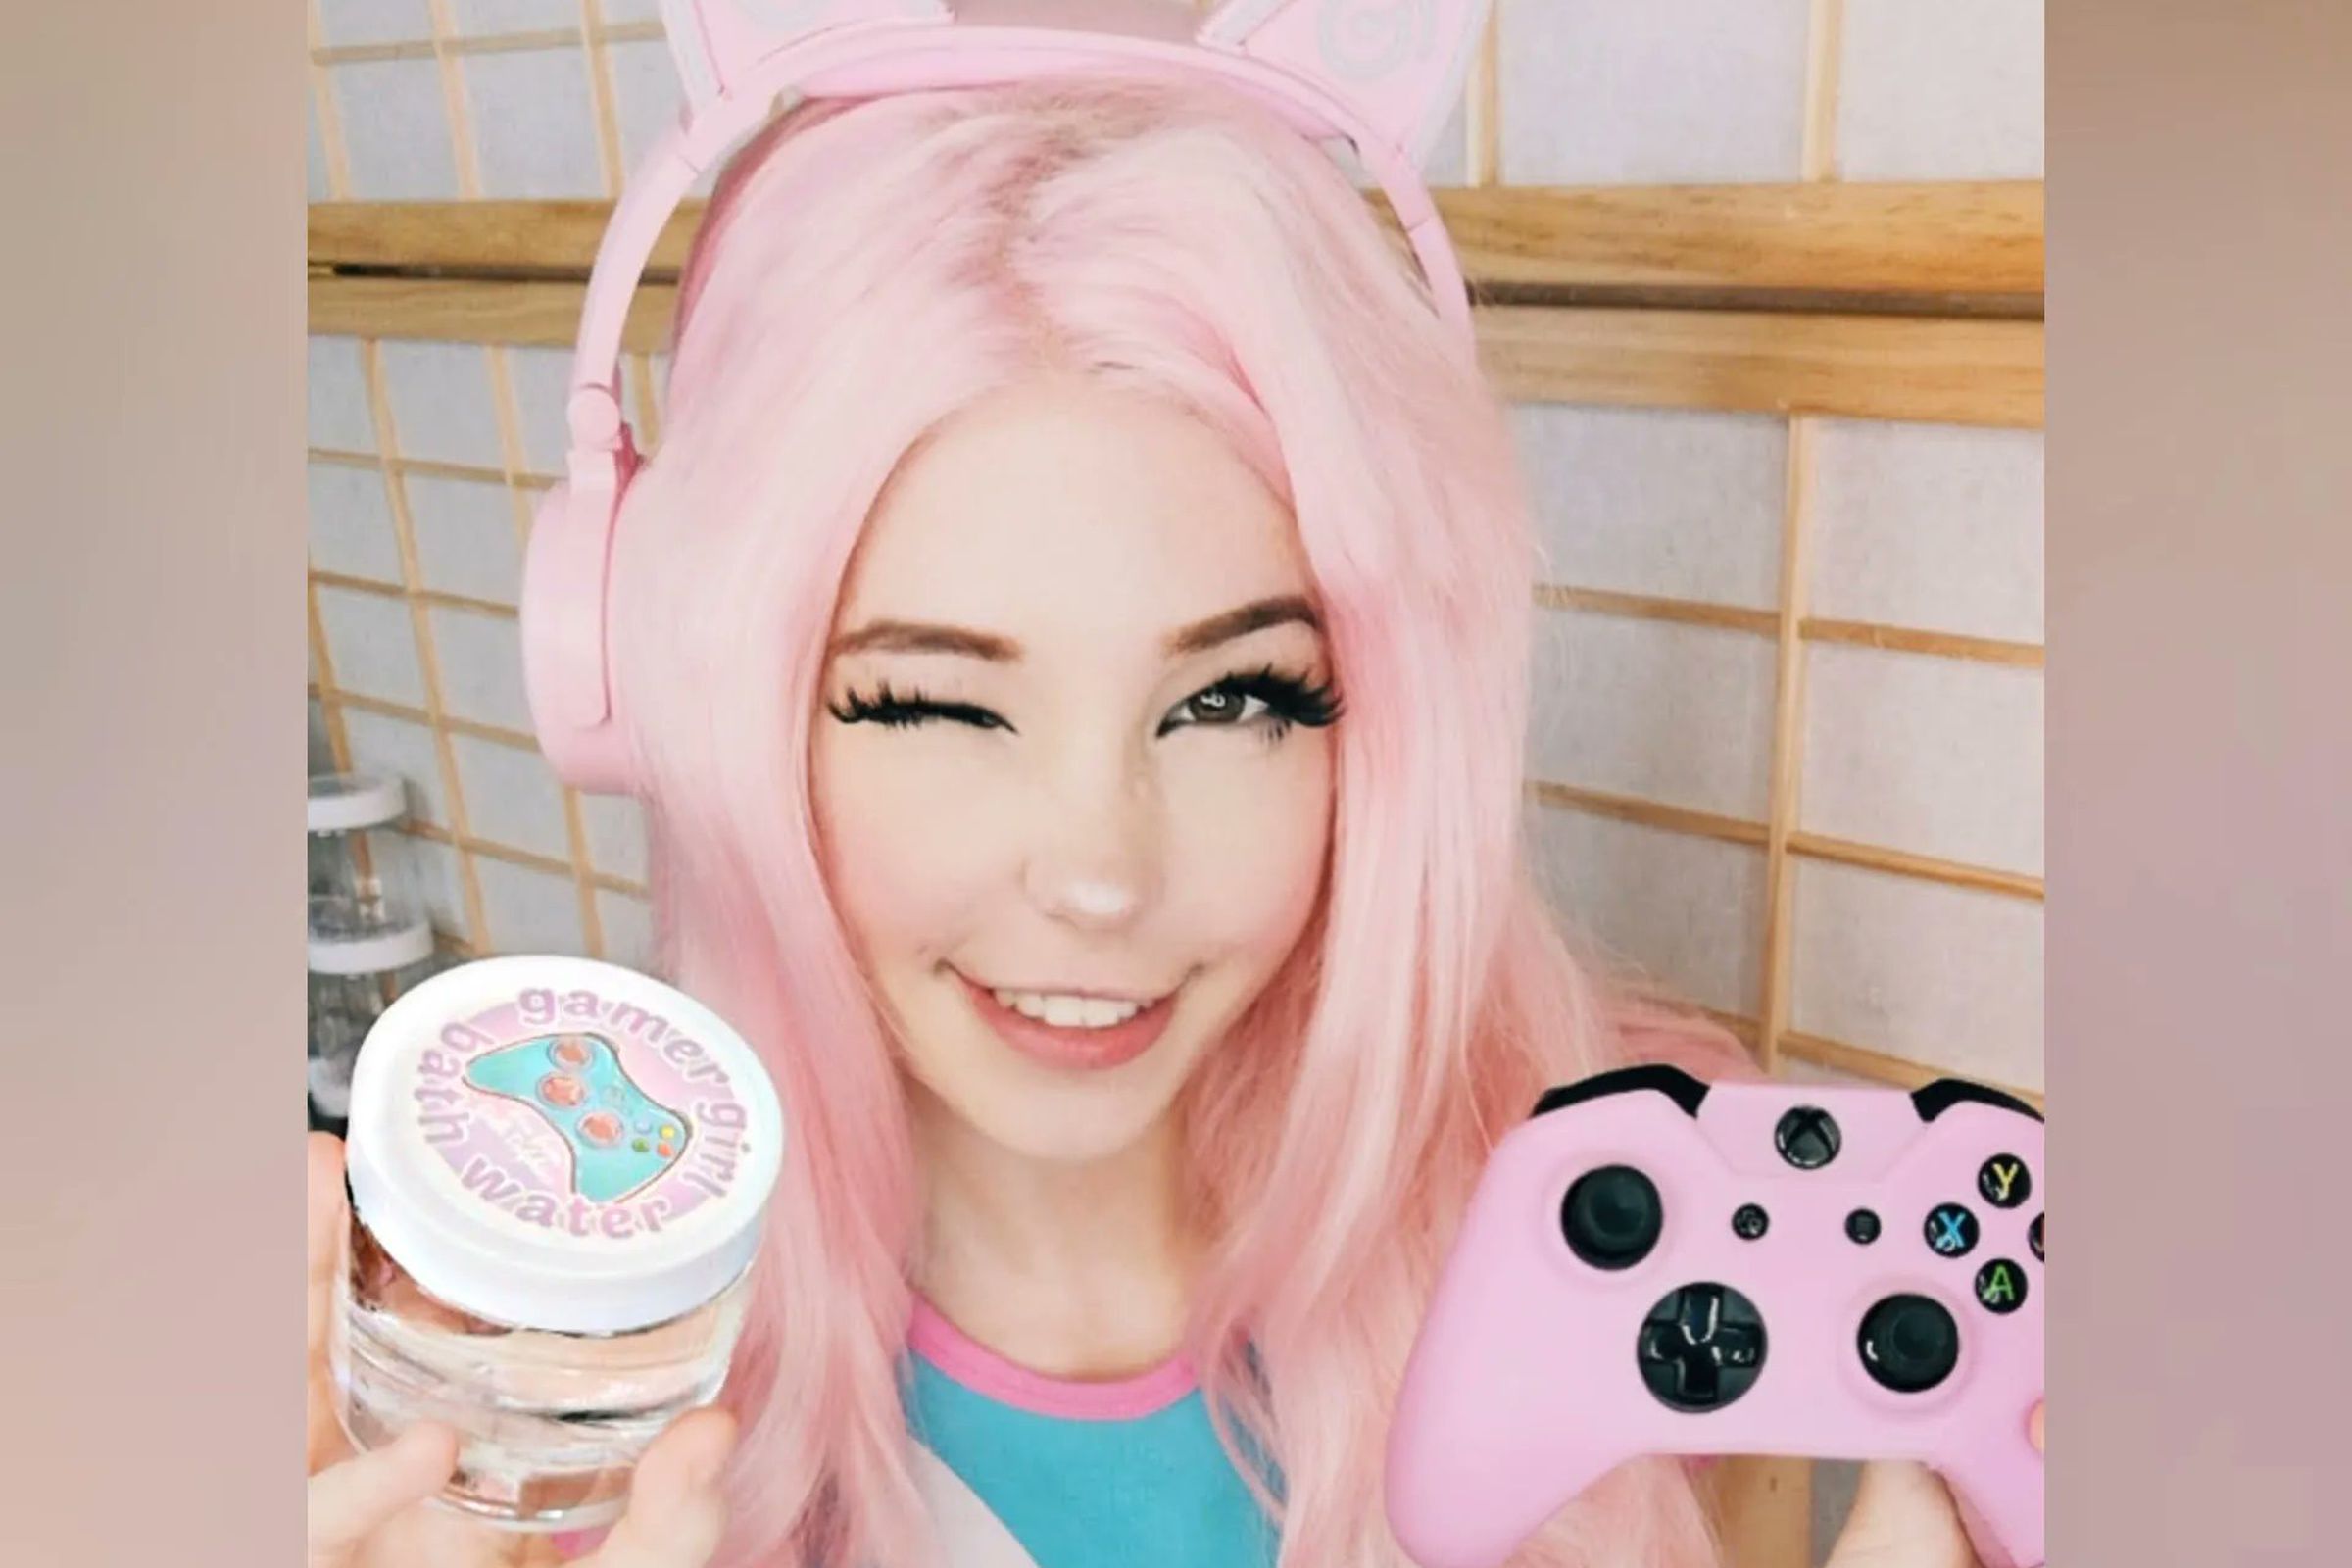 Photo of Belle Delphine, an adult content creator, sitting in a bathtub in a bathing suit holding up a controller and a jar of her bathwater.